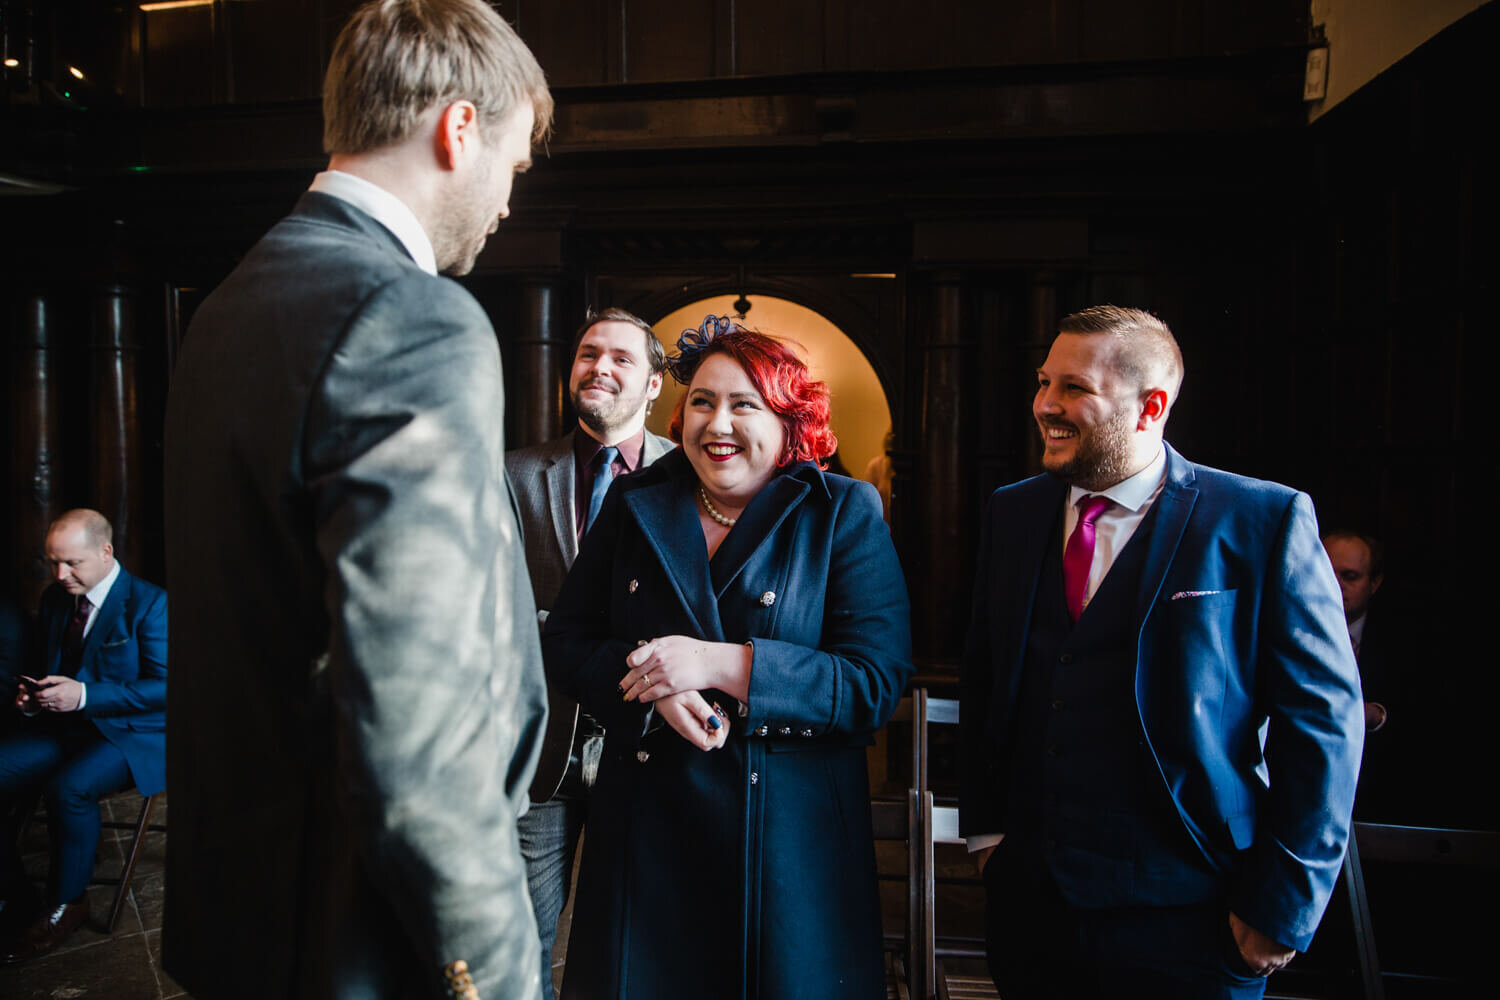 wedding guests sharing joke with groom before ceremony processional